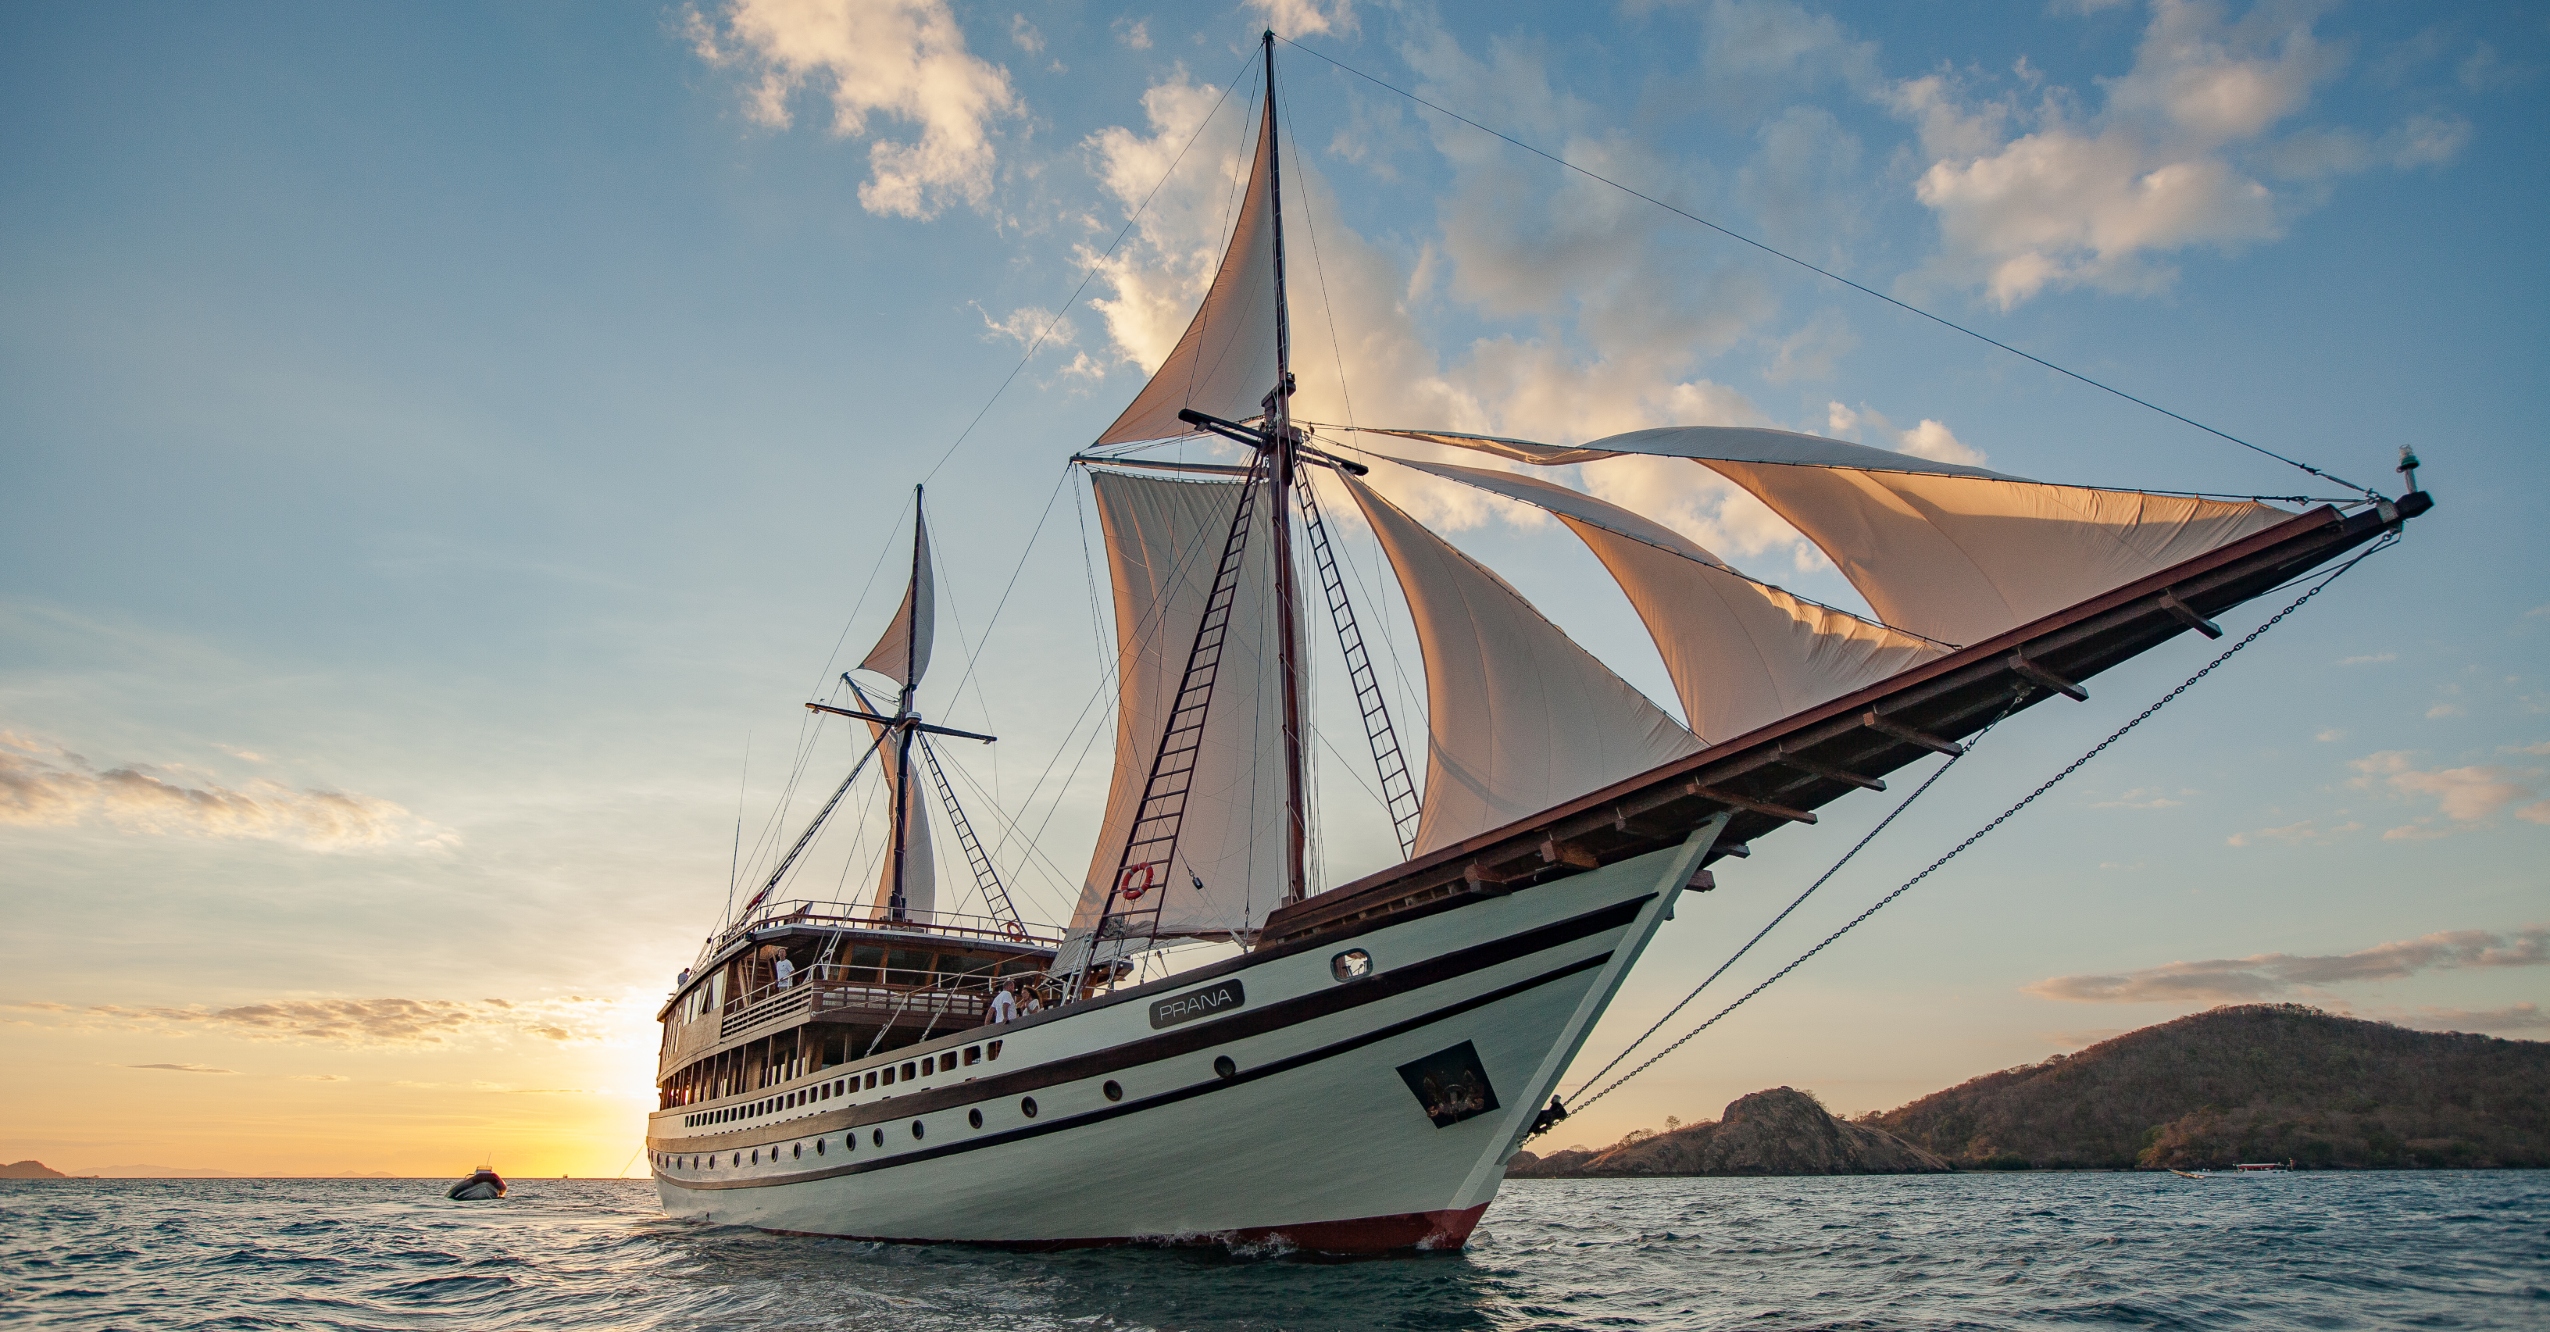 Step Aboard The World’s Largest ‘Phinisi’ Sailing Yacht